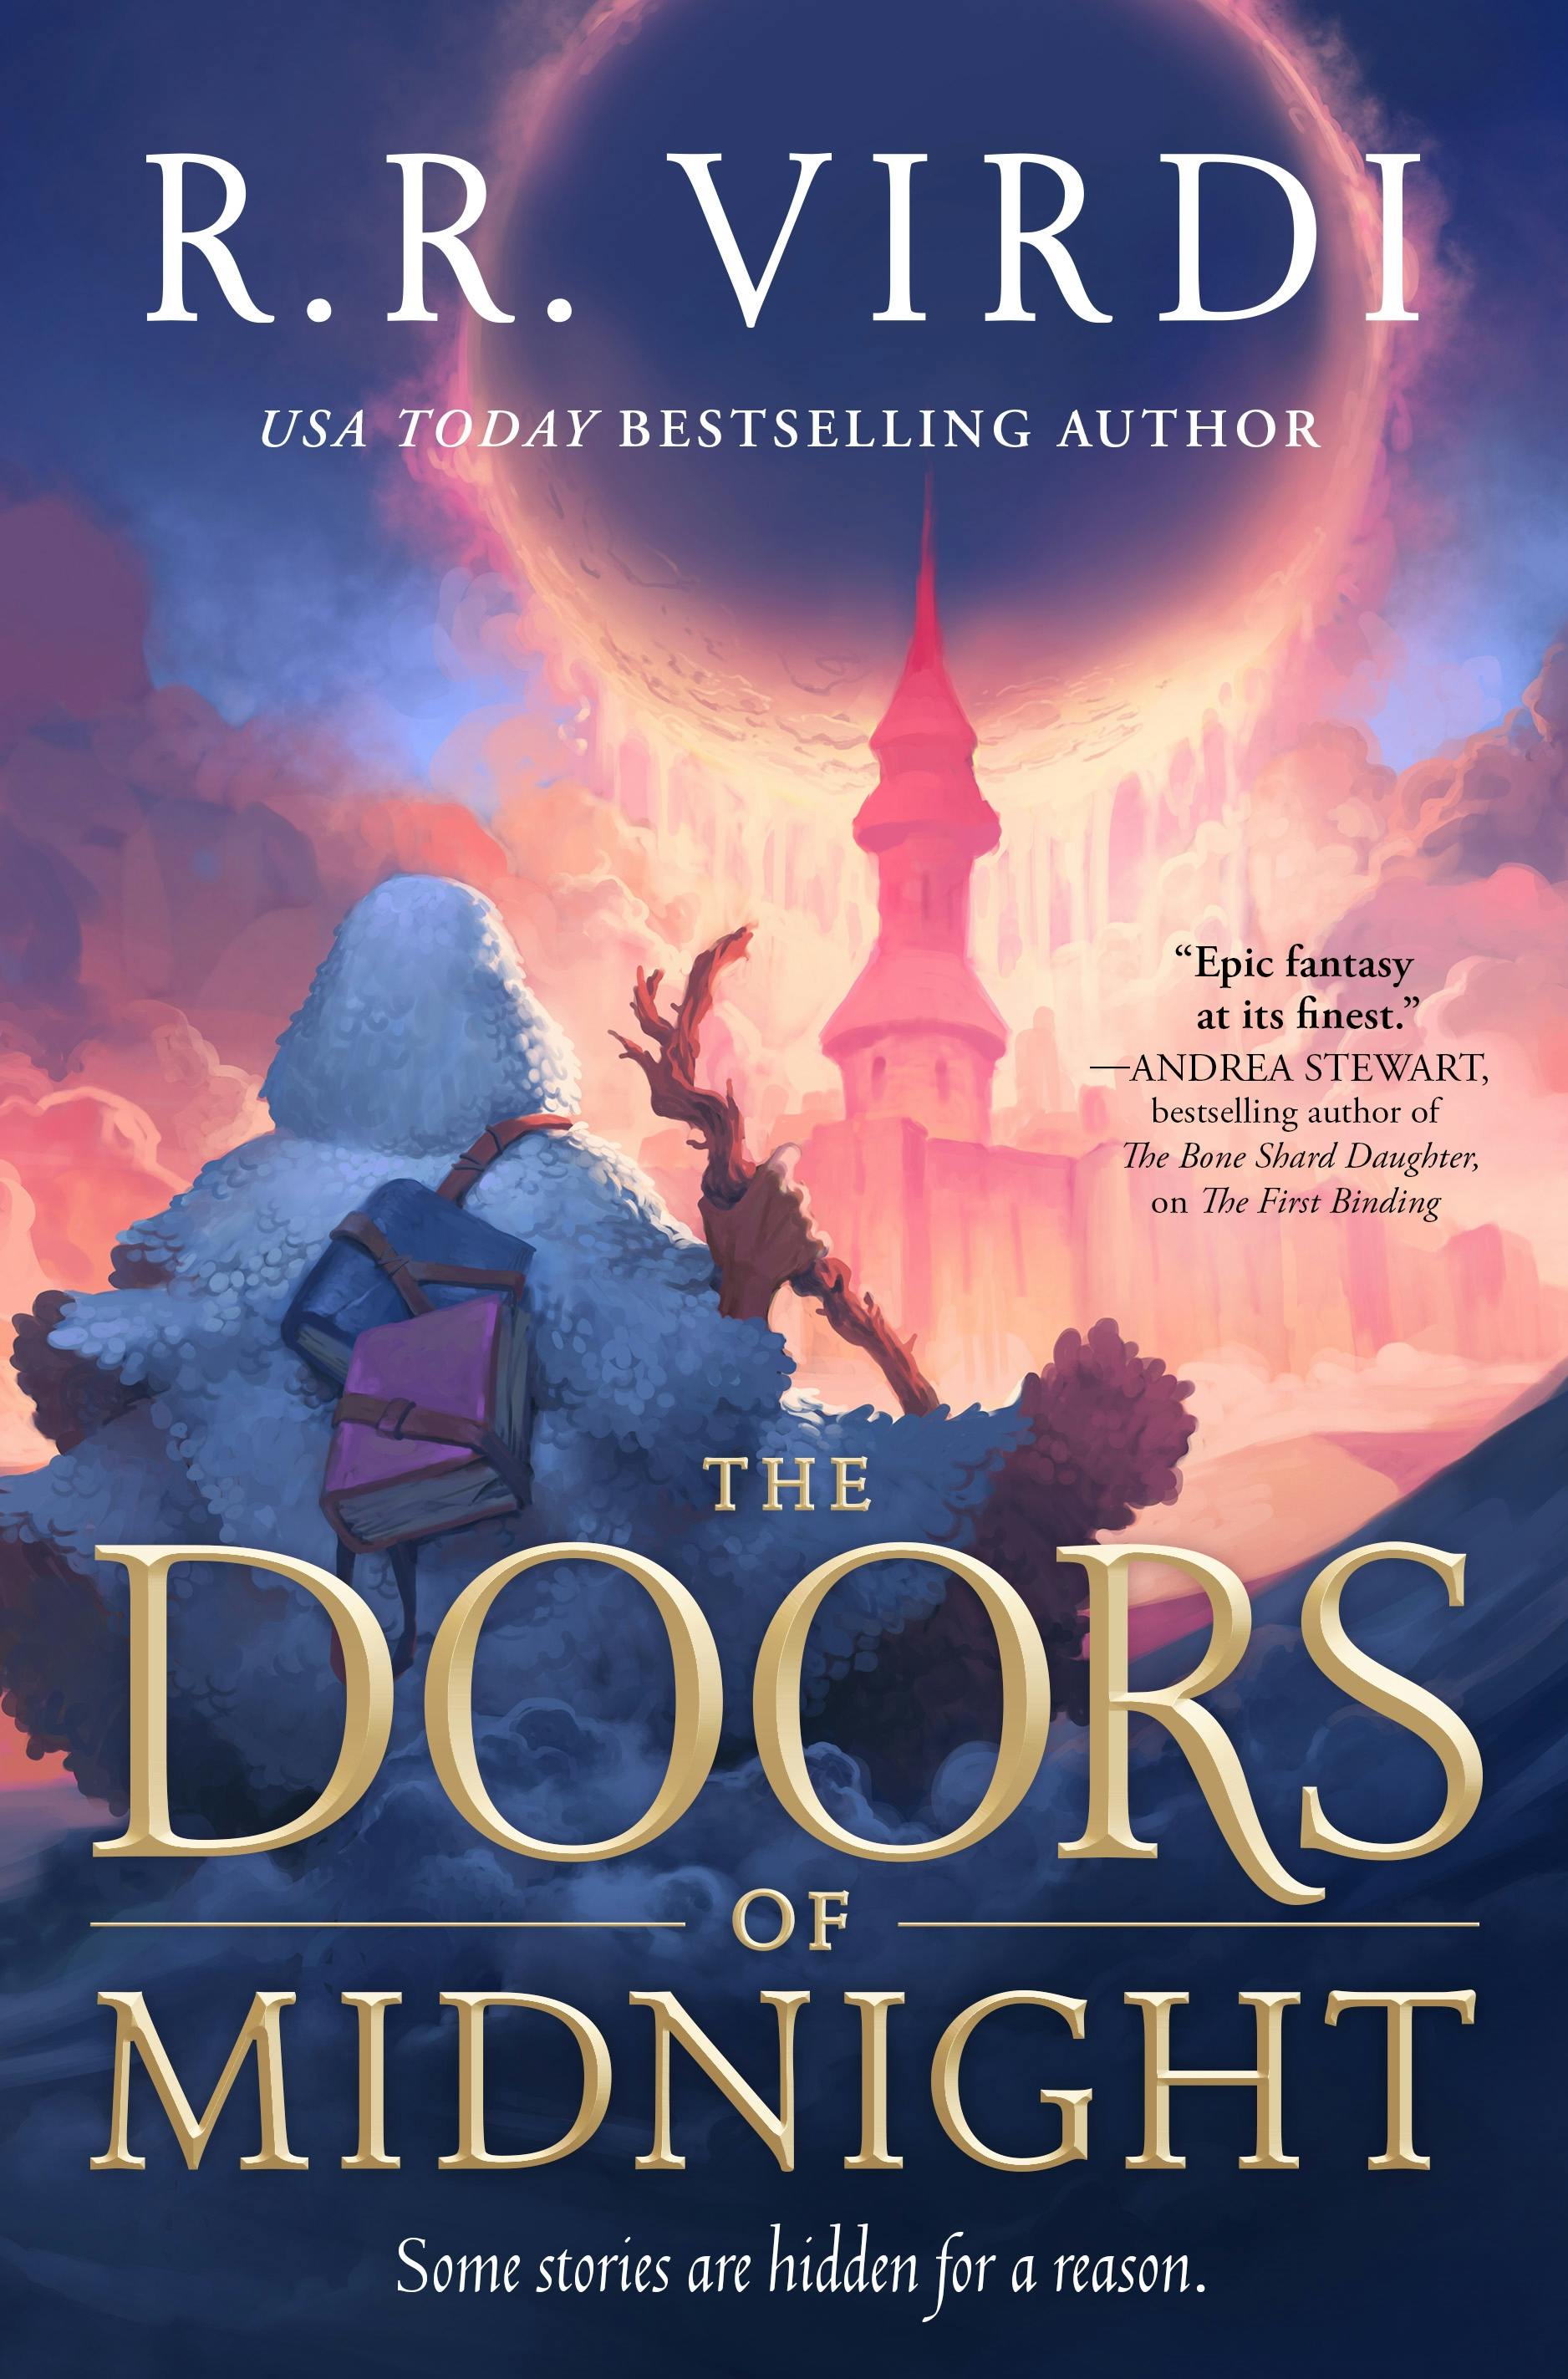 Cover for the book titled as: The Doors of Midnight